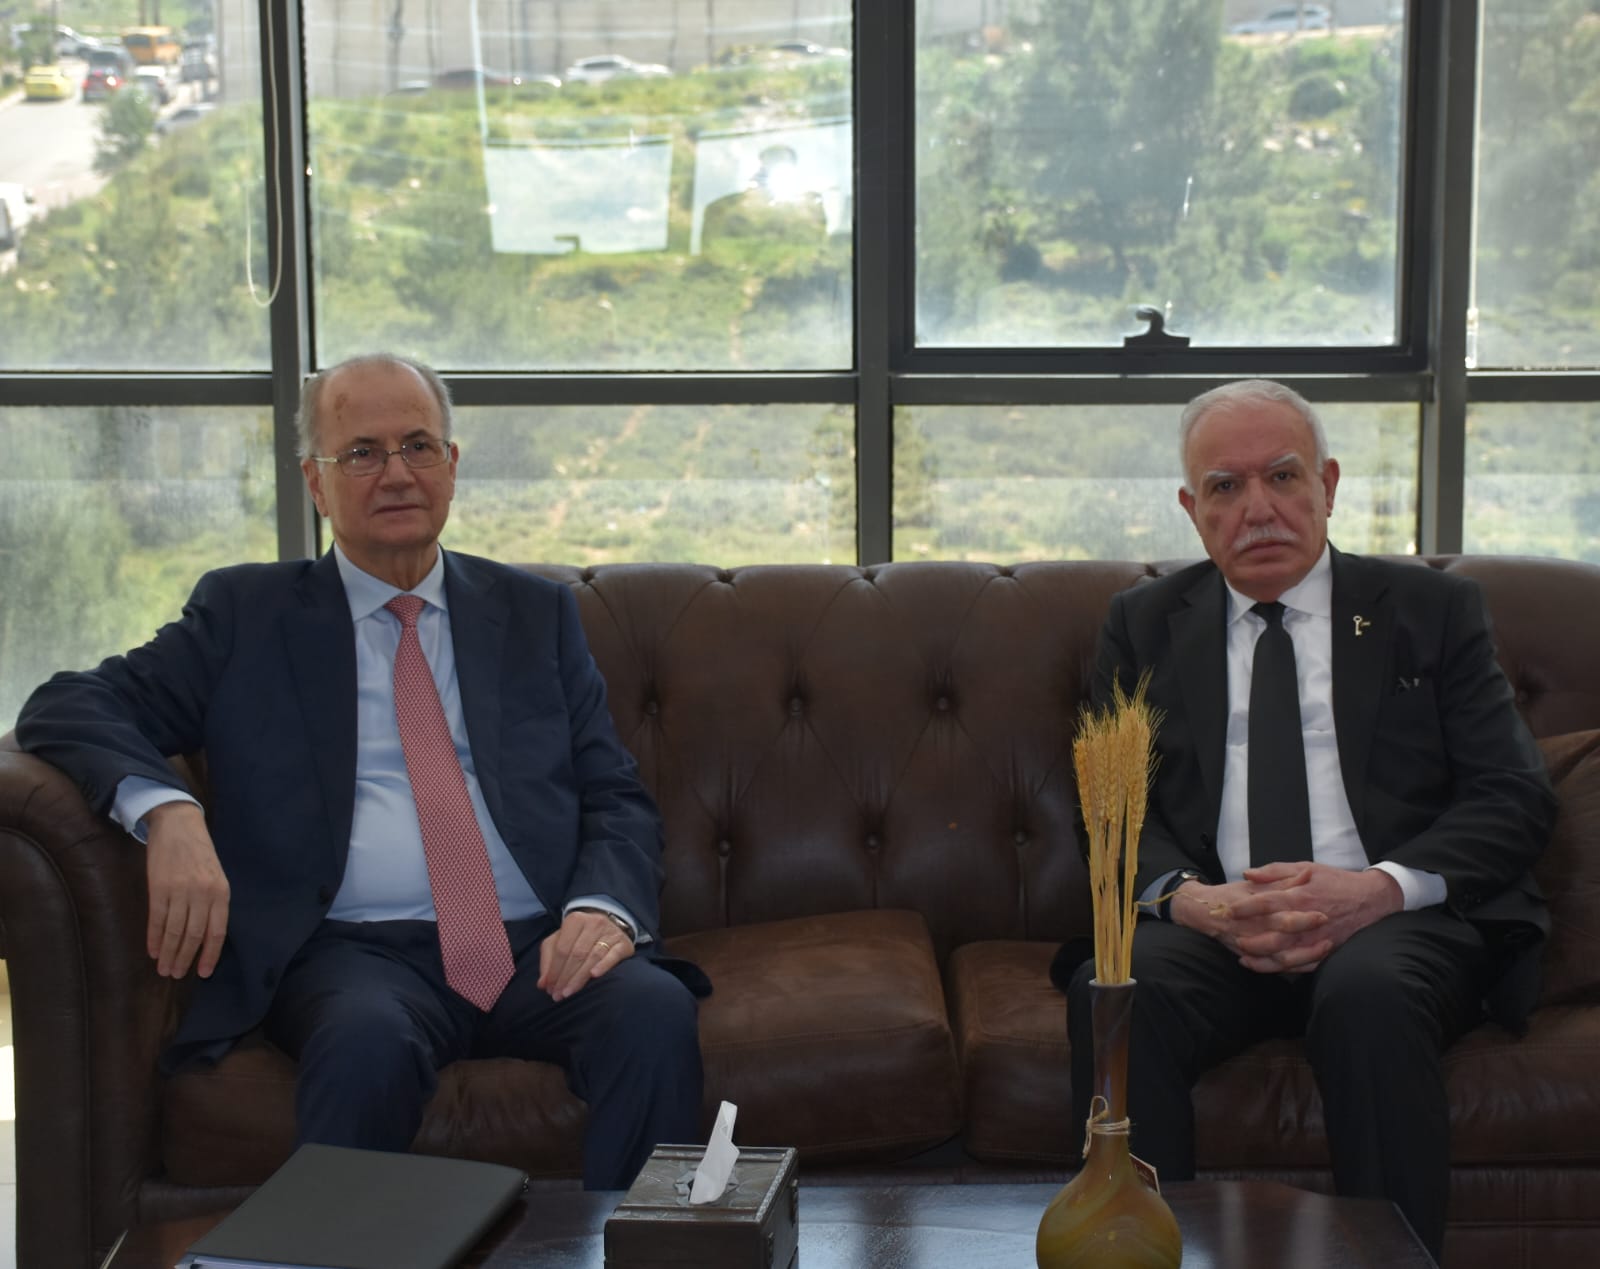 PICA bids farewell to H.E. Dr. Riad Malki and warmly welcomes H.E. Dr. Mohammad Musfata, Prime Minister and Minister of Foreign Affairs & Expatriates, and H.E. Mrs. Farsin Aghabakian, Minister of State for Foreign Affairs